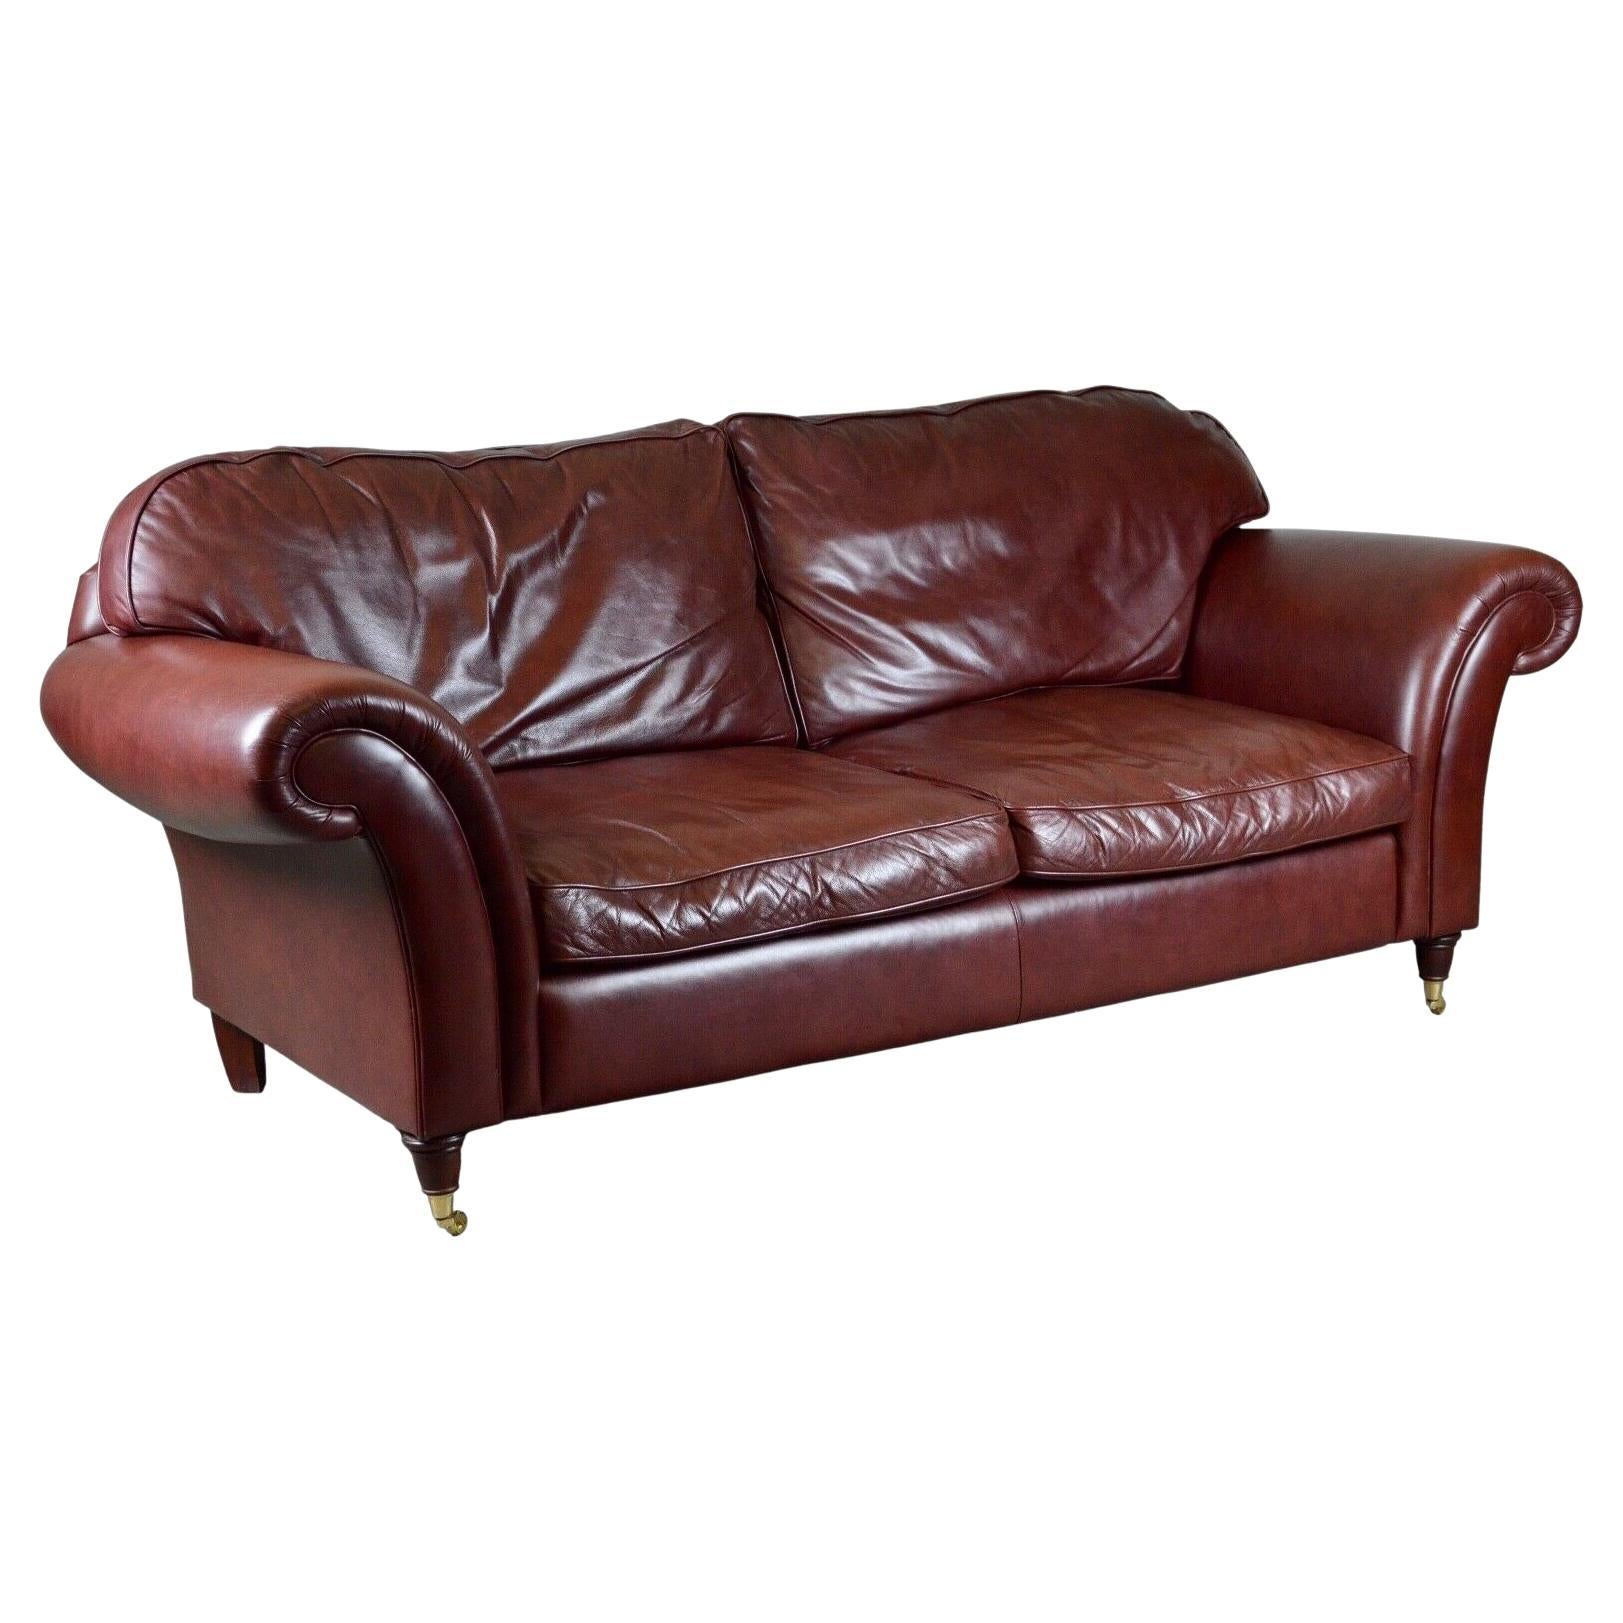 Luxury 3 Seater Heritage Brown Leather Laura Ashley Mortimer Sofa with Castors For Sale